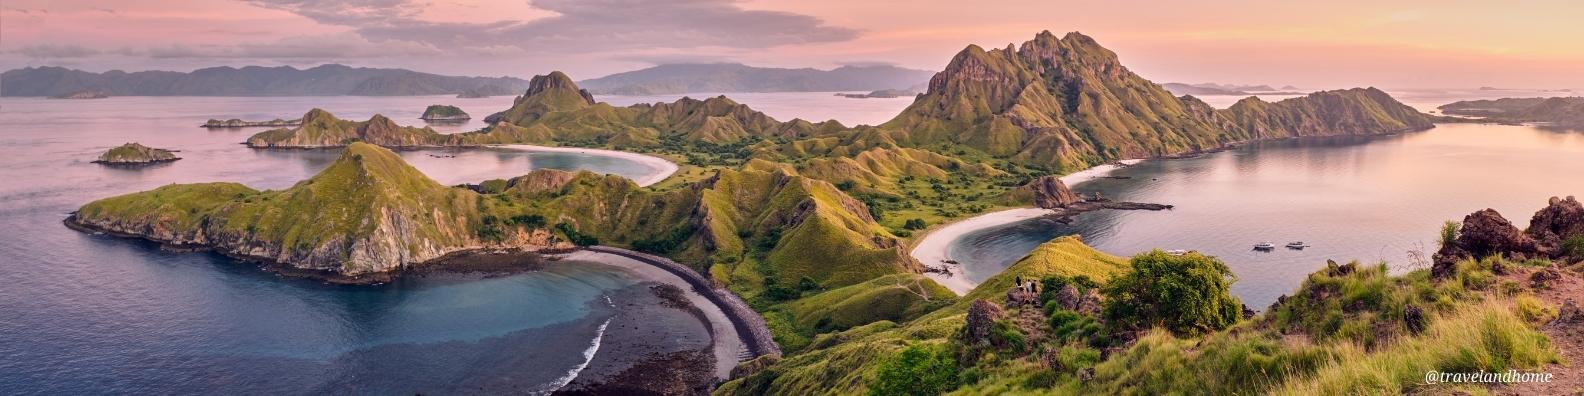 Visit Padar Island, Indonesia, sunset, travel and home